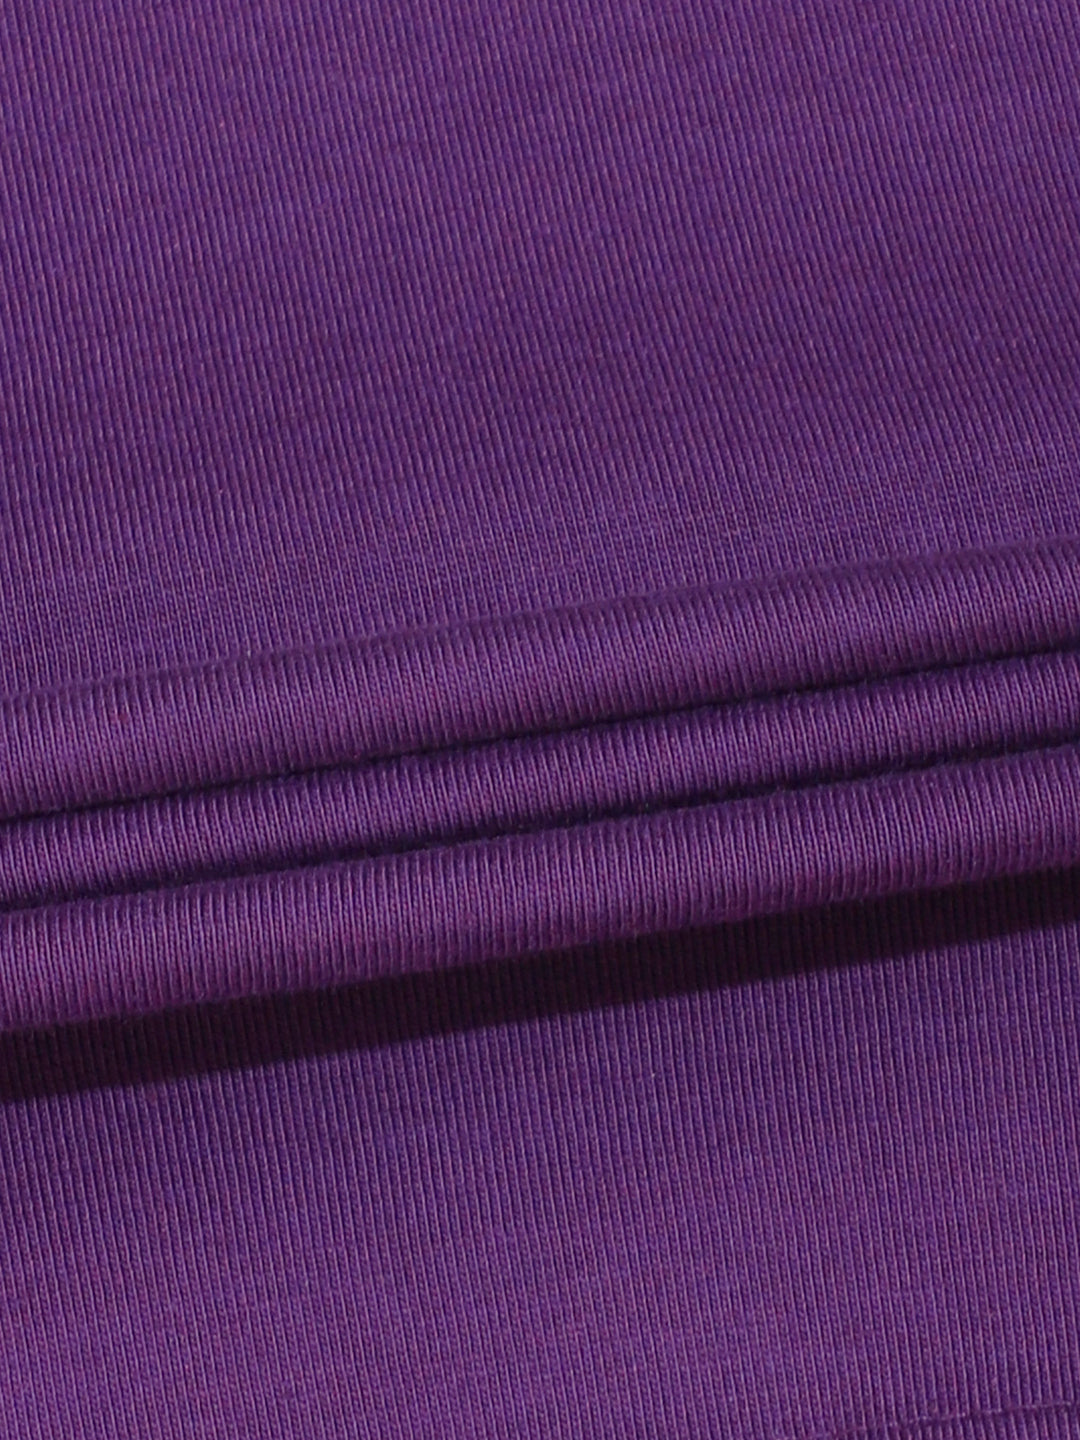 Never Enough Time Oversized Purple T-Shirt